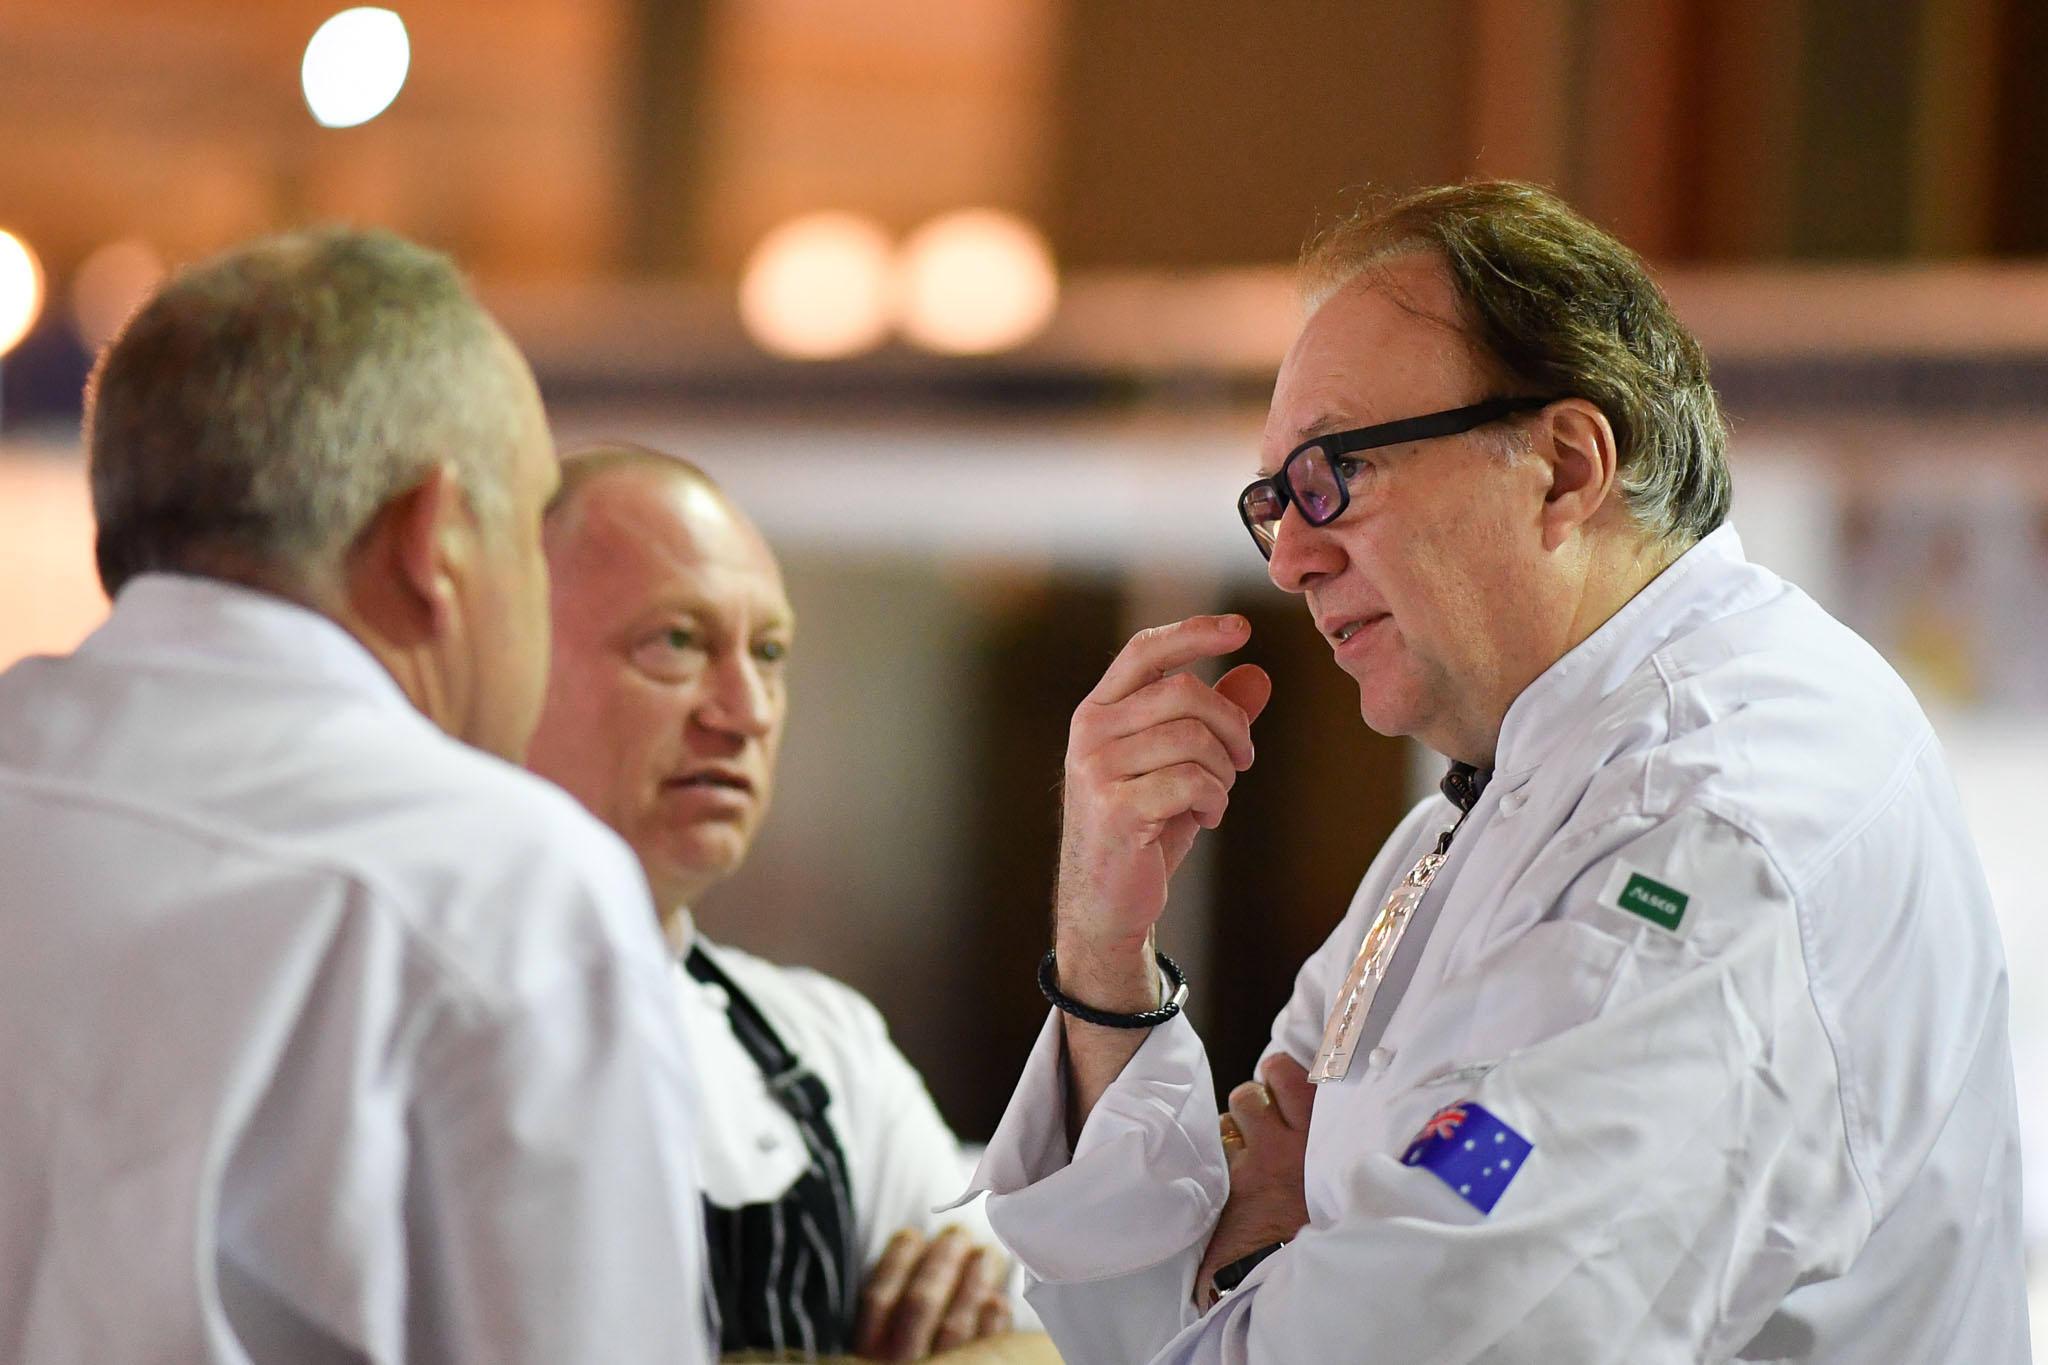 Melbourne, 30 May 2017 - Head judge Philippe Mouchel from the Philippe Restaurant kitchen invigilator judge talks to Tom Milligan of the Bocuse d'Or Academy Australia at the Australian selection trials of the Bocuse d'Or culinary competition held during the Food Service Australia show at the Royal Exhibition Building in Melbourne, Australia. Photo Sydney Low